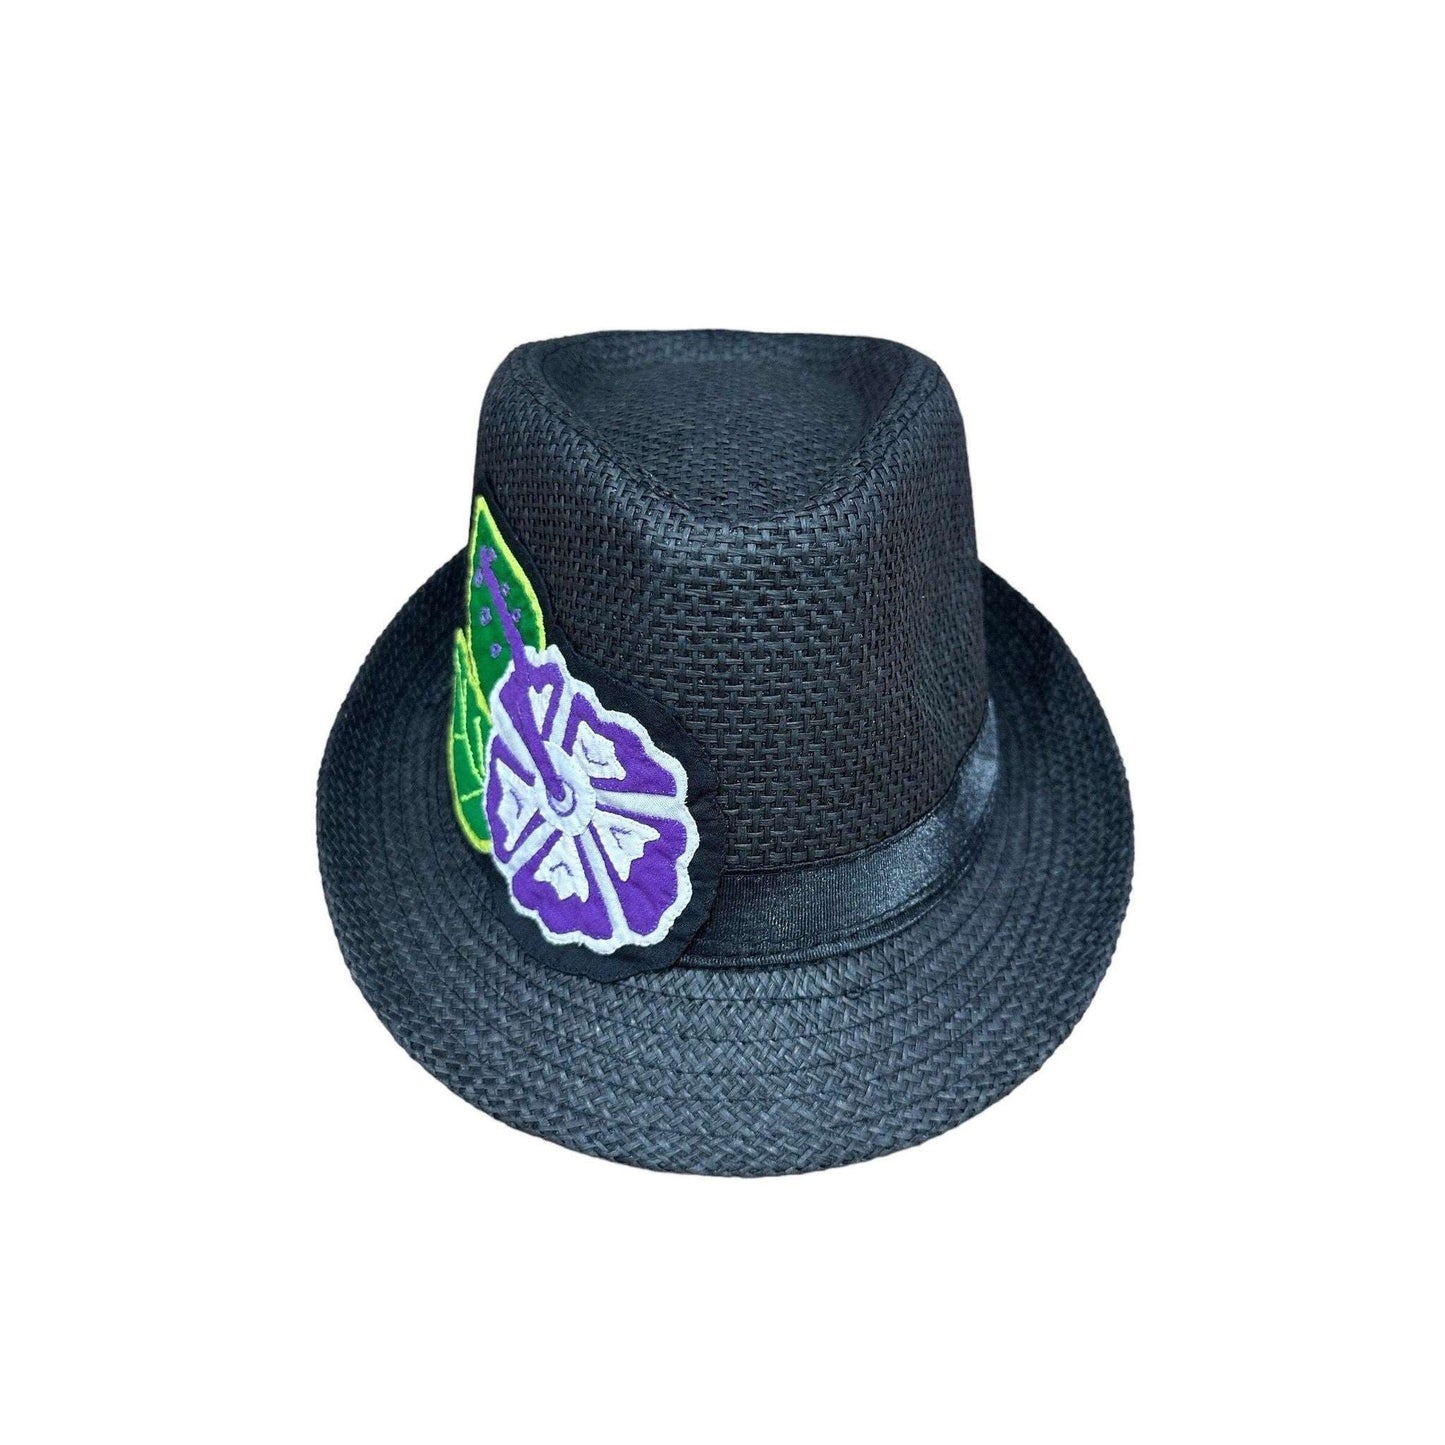 a hat with a hat on top of it 